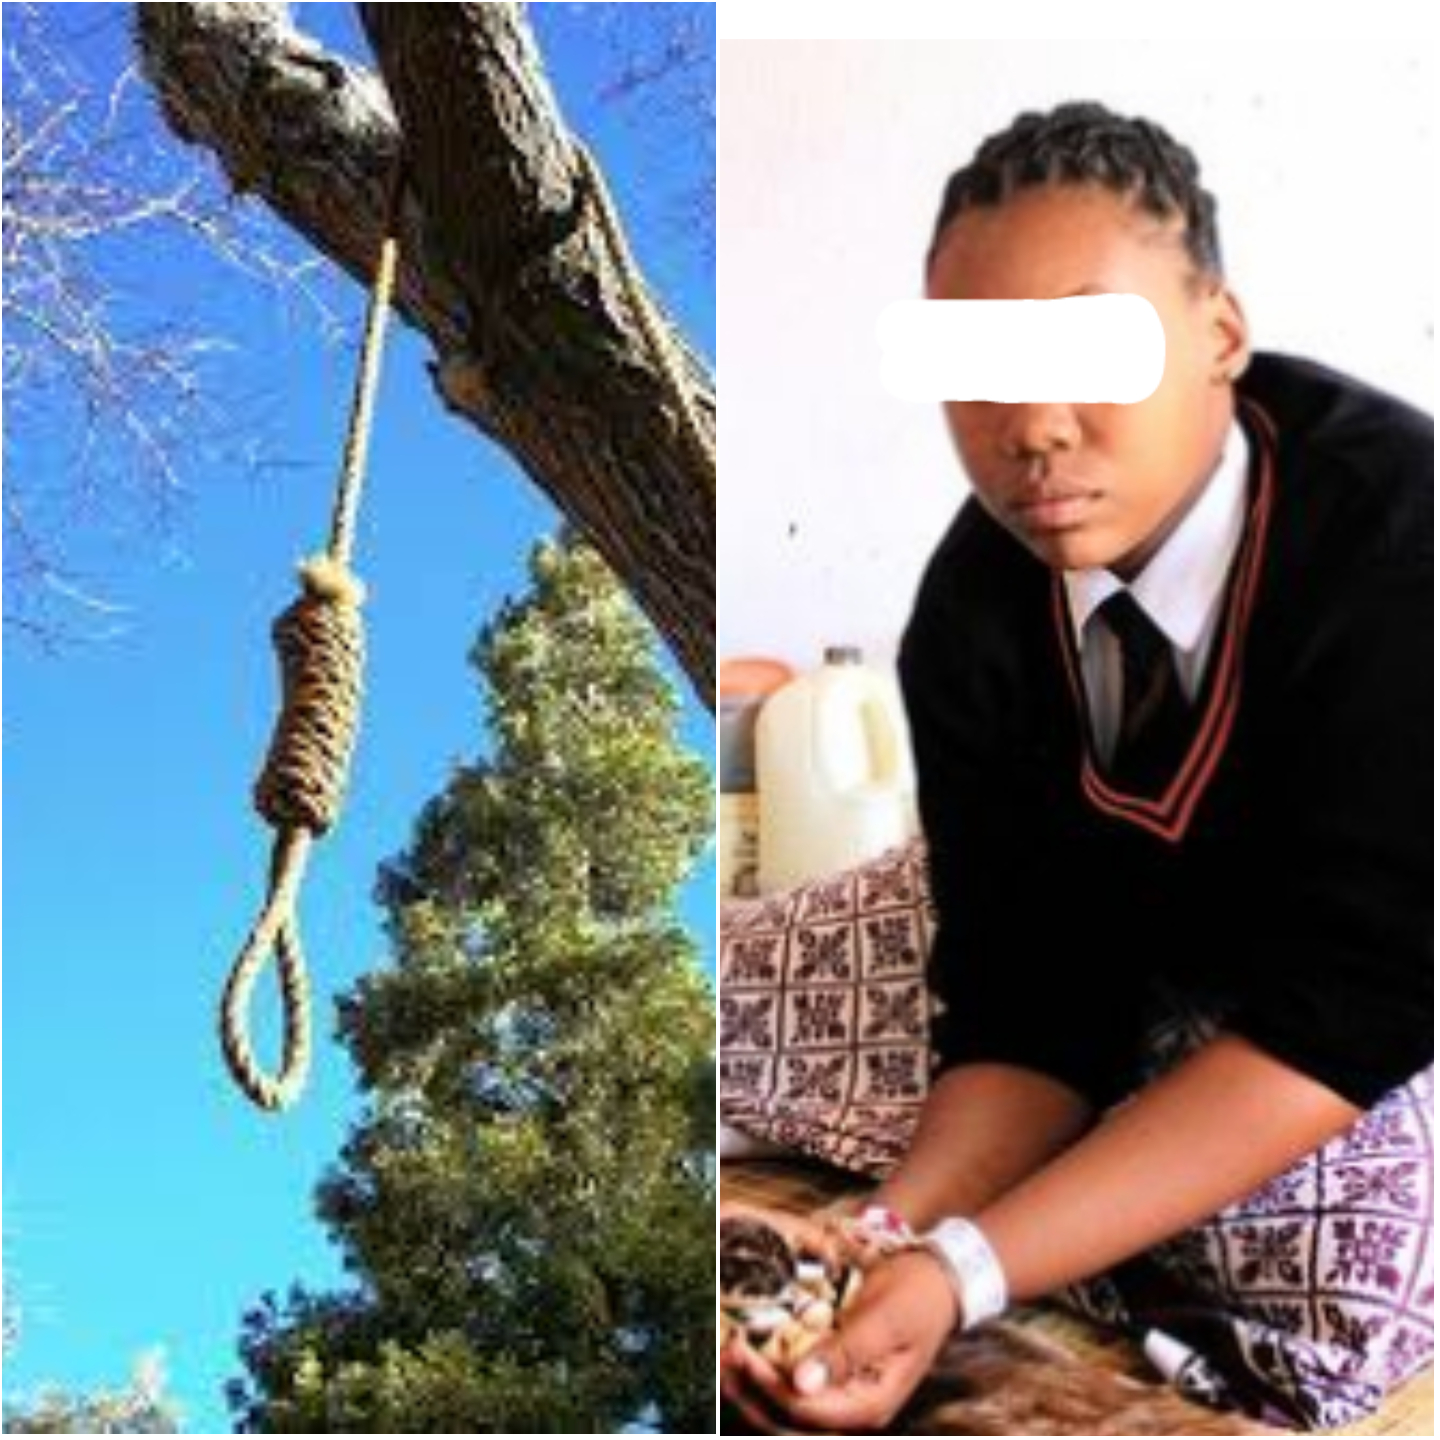 Girl Hangs Self After Ancestors Stopped Her From Going To School | VIDEO